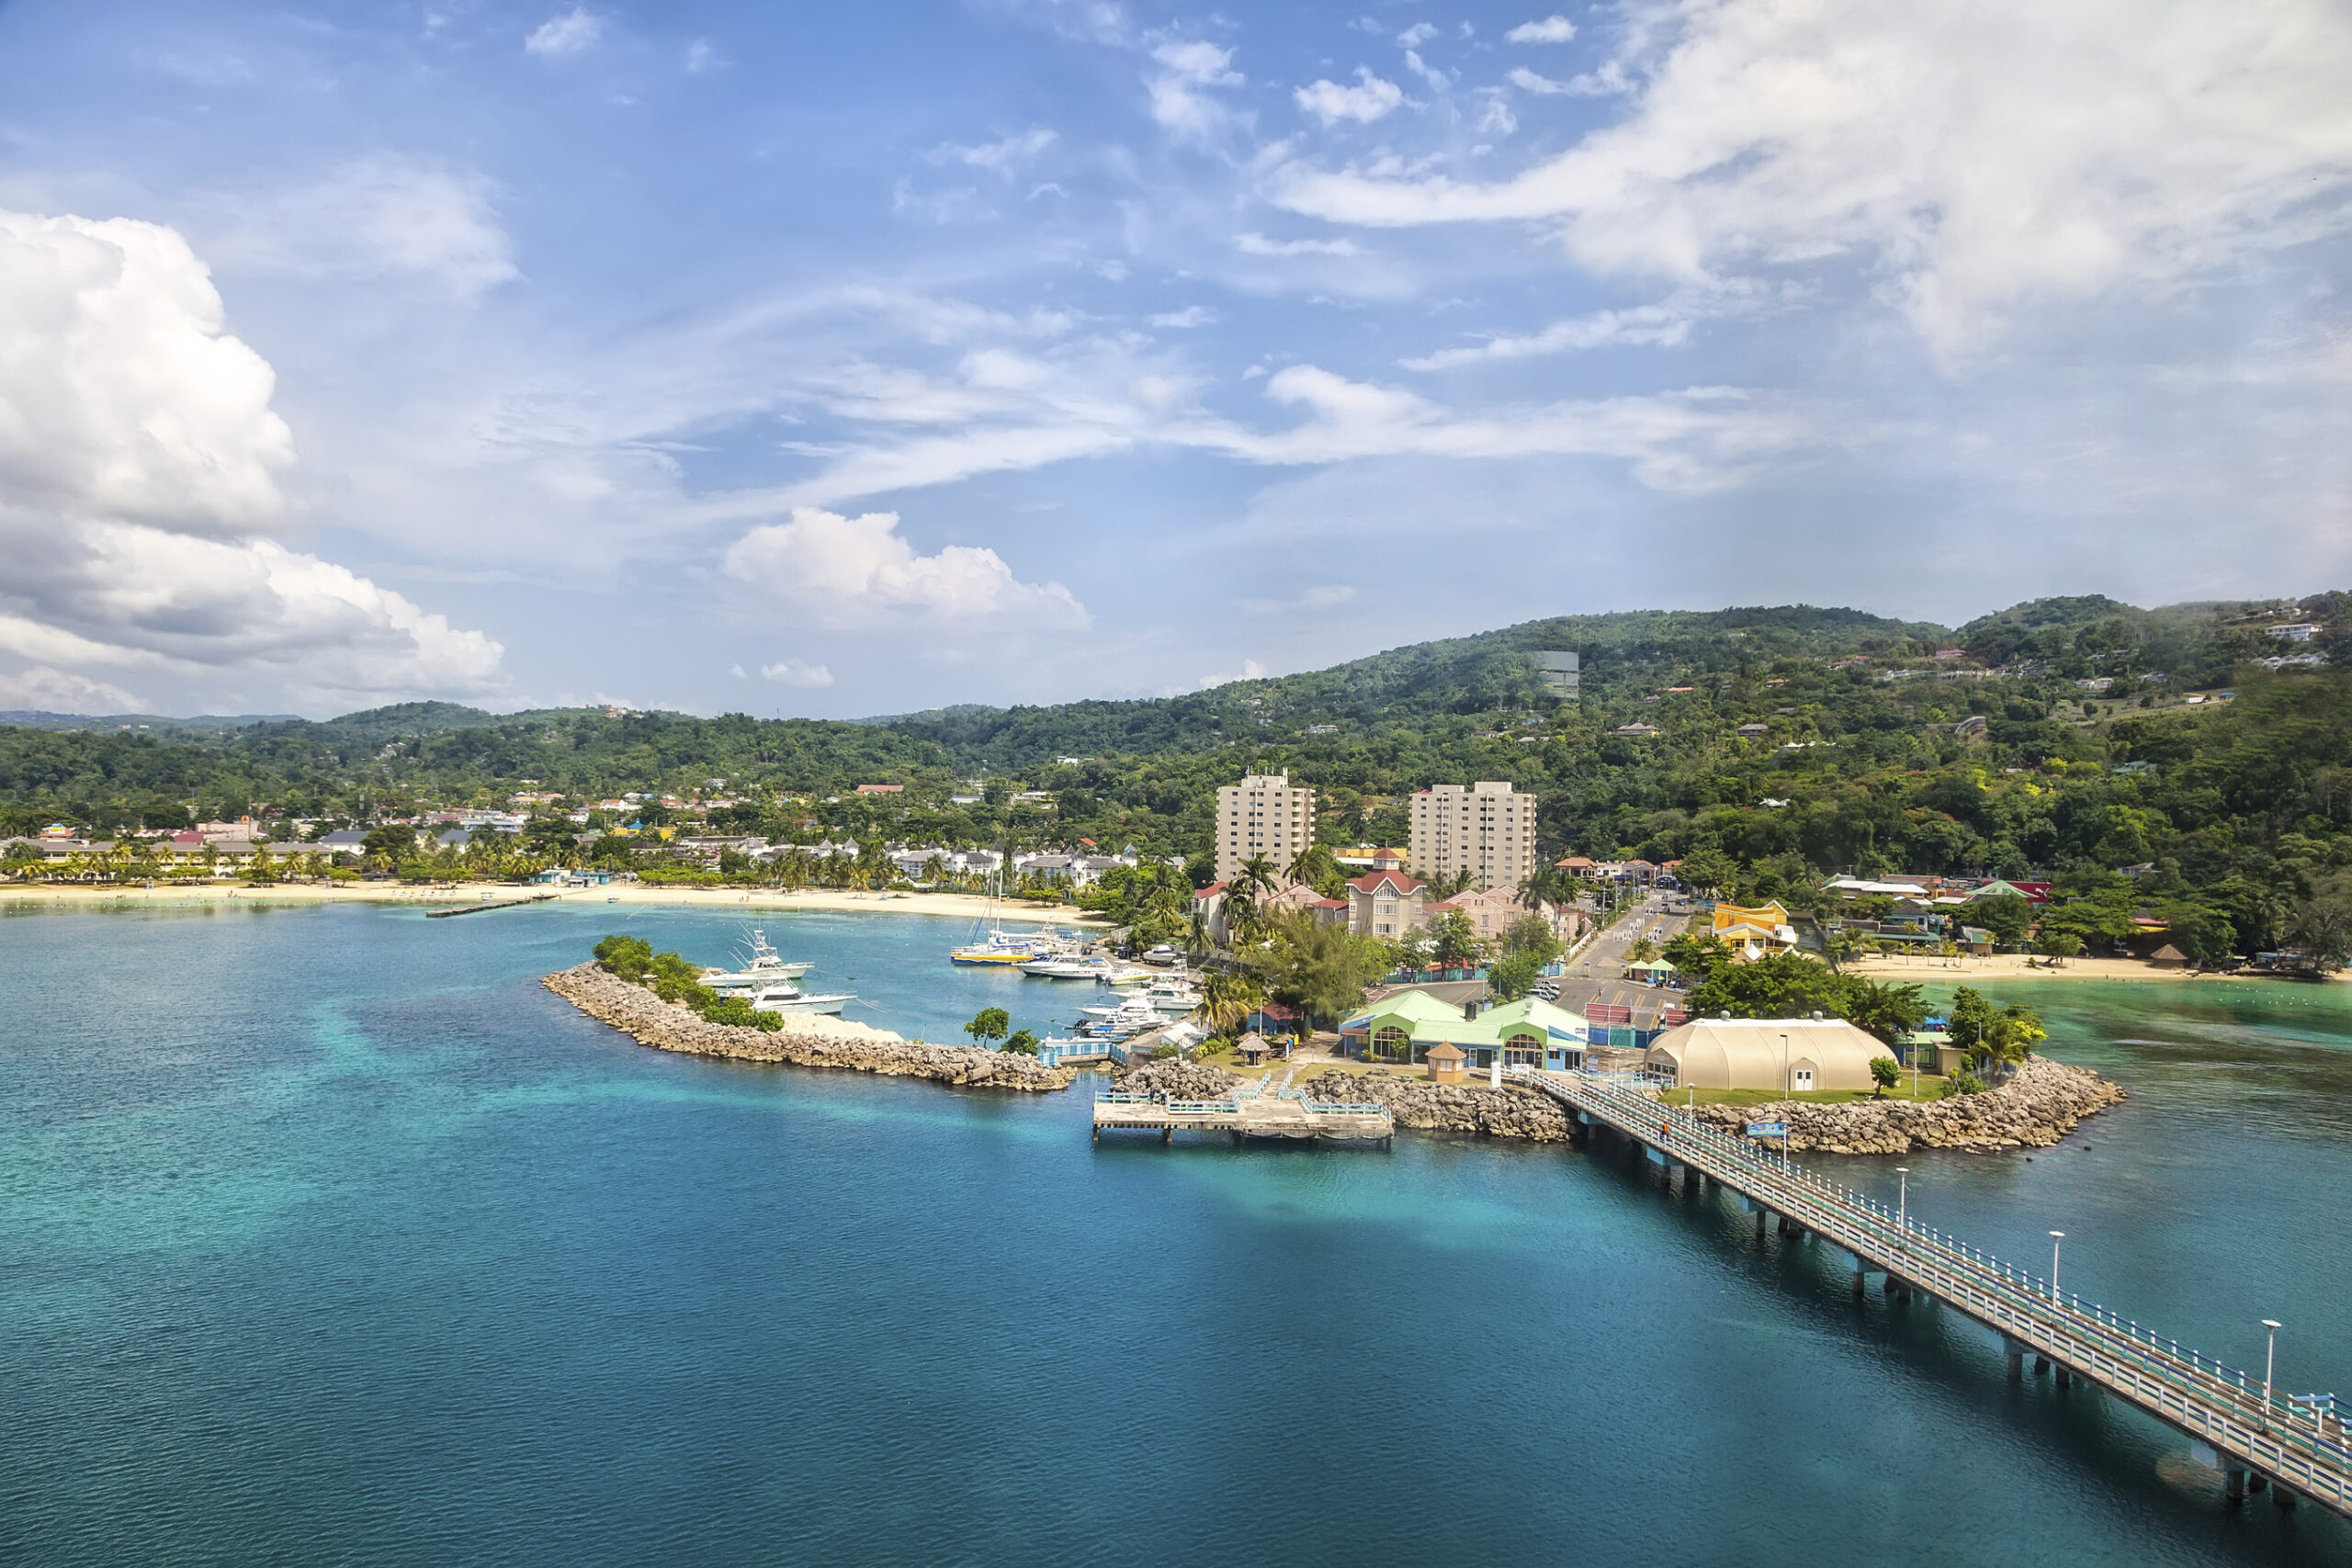 An aerial vista of Montego Bay, Jamaica, revealing its turquoise waters and lush greenery. Ideal for self-flying pilots planning a journey to South America.